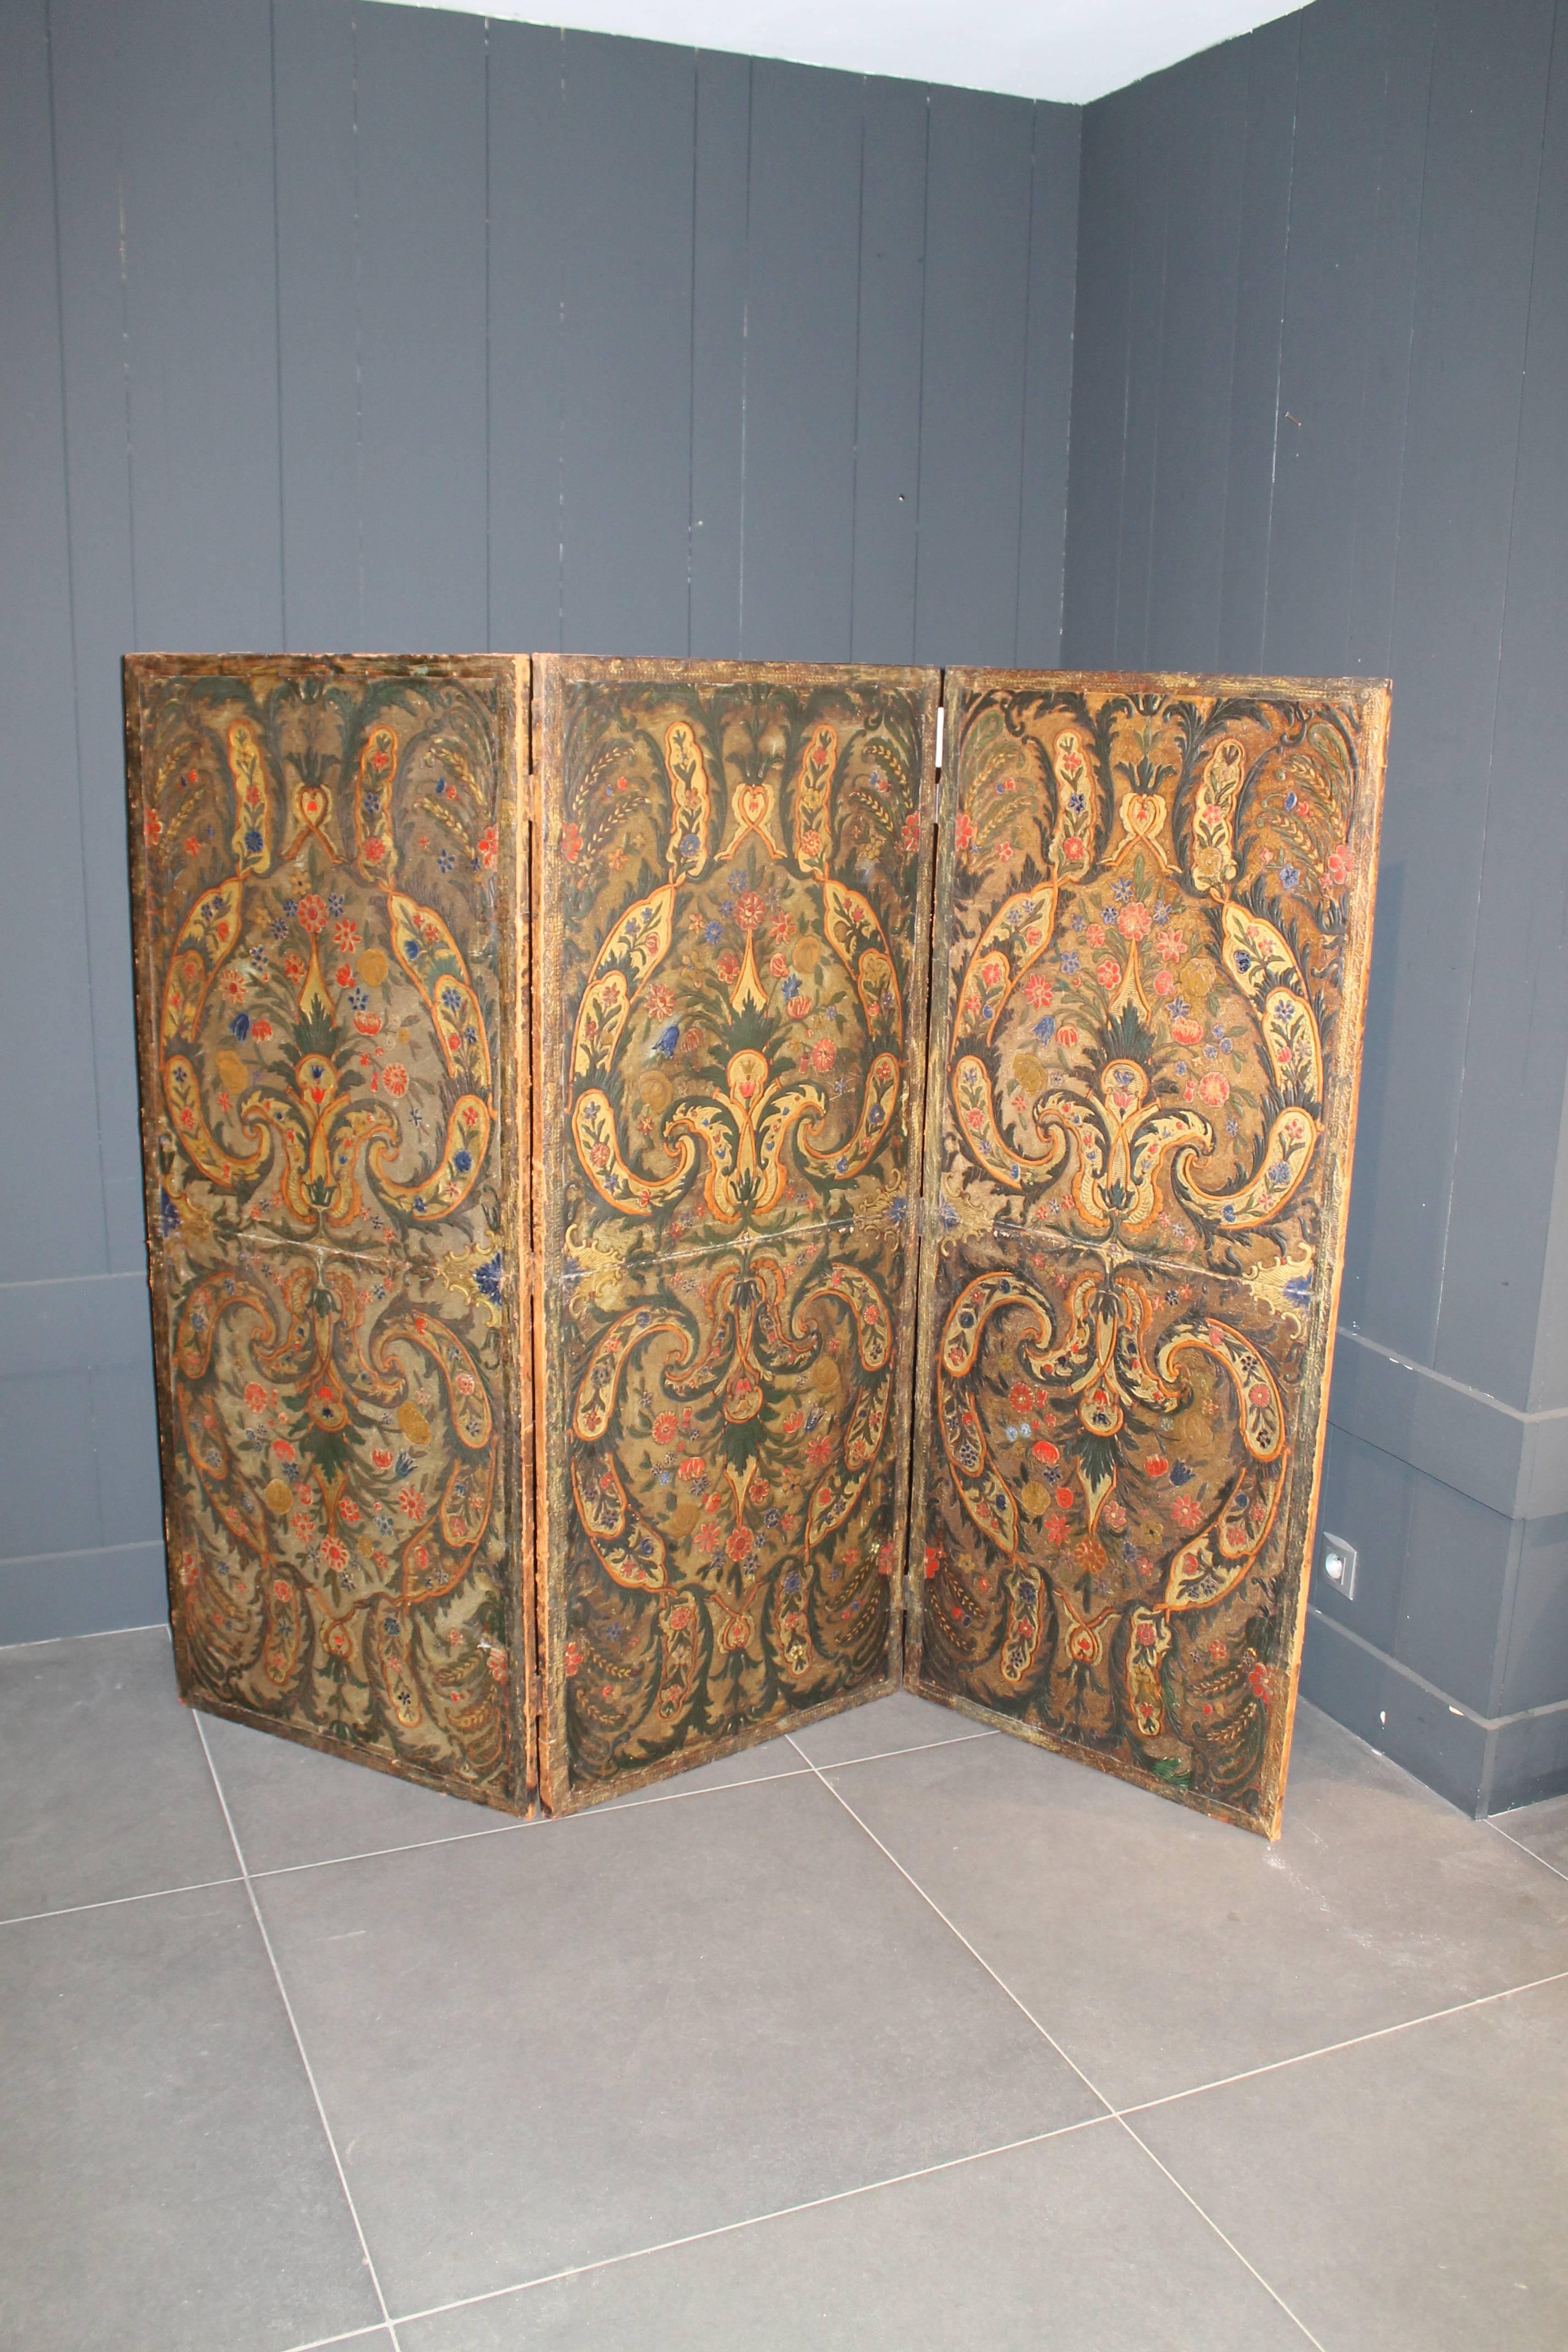 An antique Spanish embossed, painted and gold leaf leather screen with three panels 18th century. It is a double sided screen. This screen consists of a striking design combining both the tactile method of embossing a raised design upon the smooth